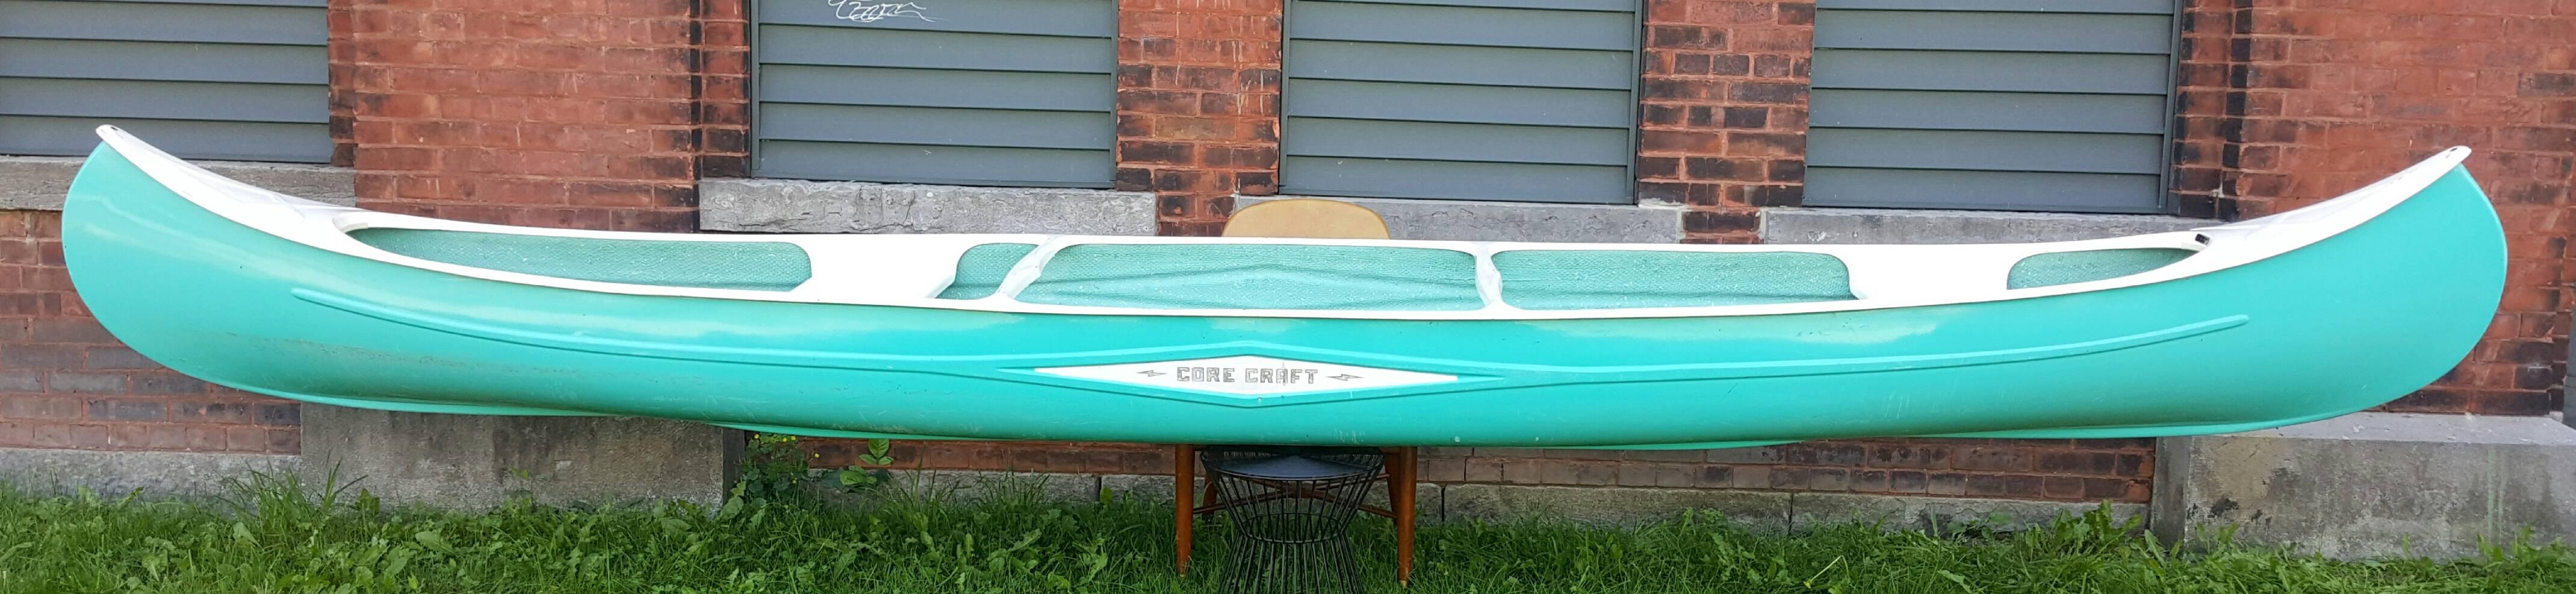 Fabulous turquoise and white fiberglass canoe manufactured by Core Craft, circa 1961-1917. Amazing quality, stunning modernist lines, nice original condition.